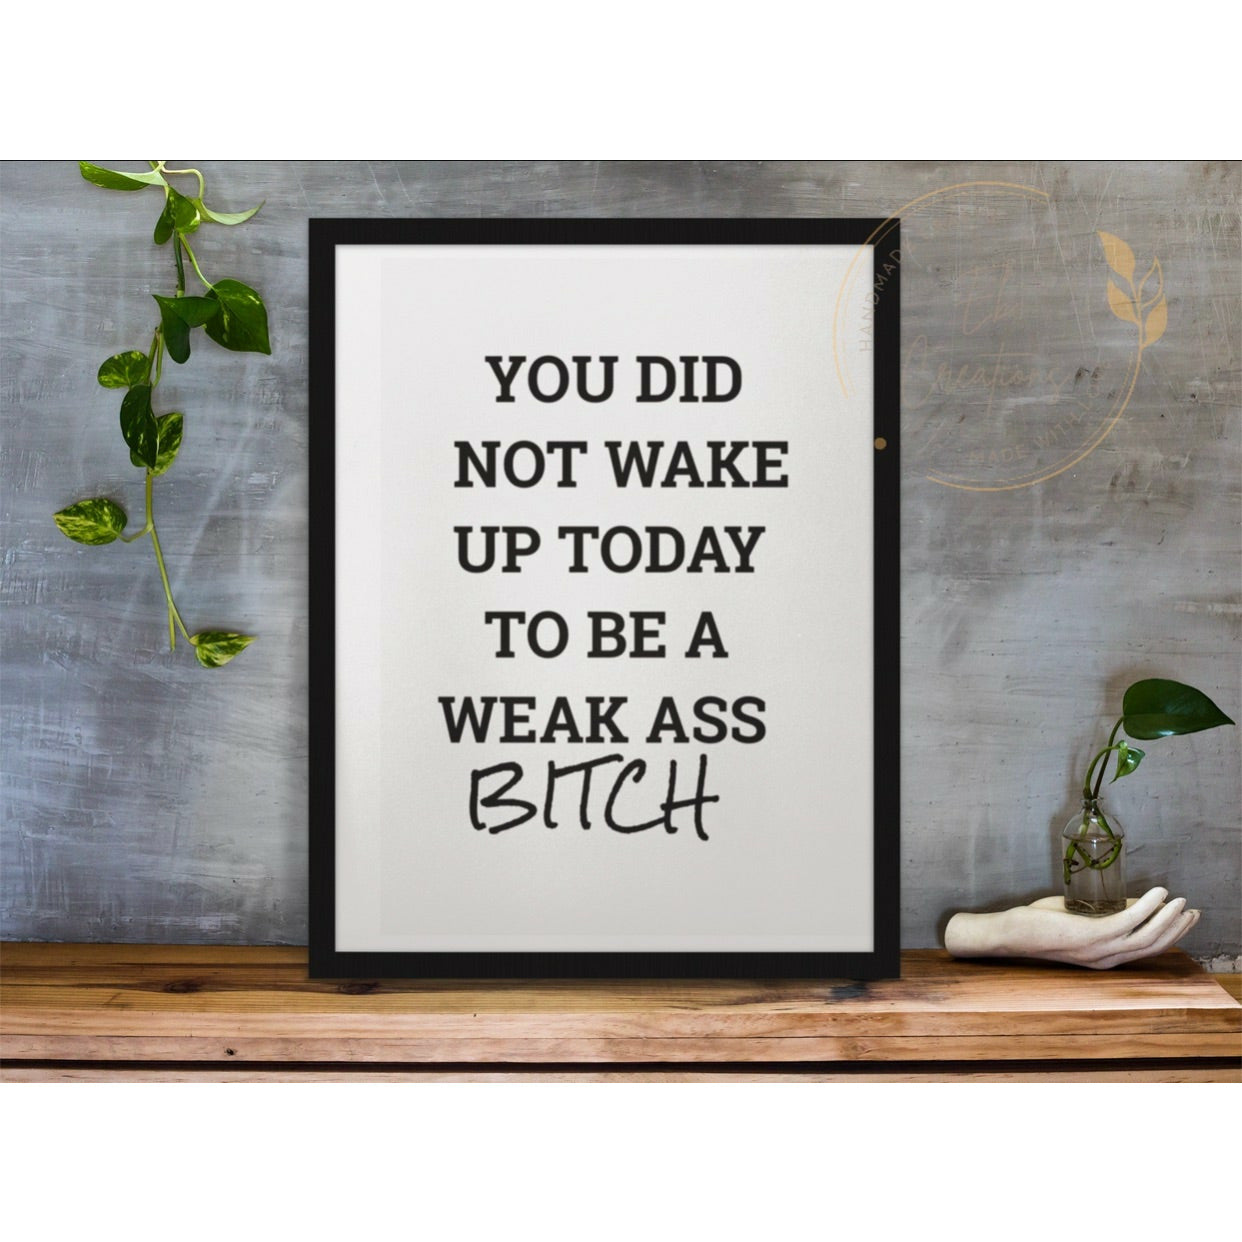 You did not wake up to be a weak ass bitch | Wall Art | Motivational Quotes | - Eb Creations Posters, Prints, & Visual Artwork You did not wake up to be a weak ass bitch | Wall Art | Motivational Quotes |